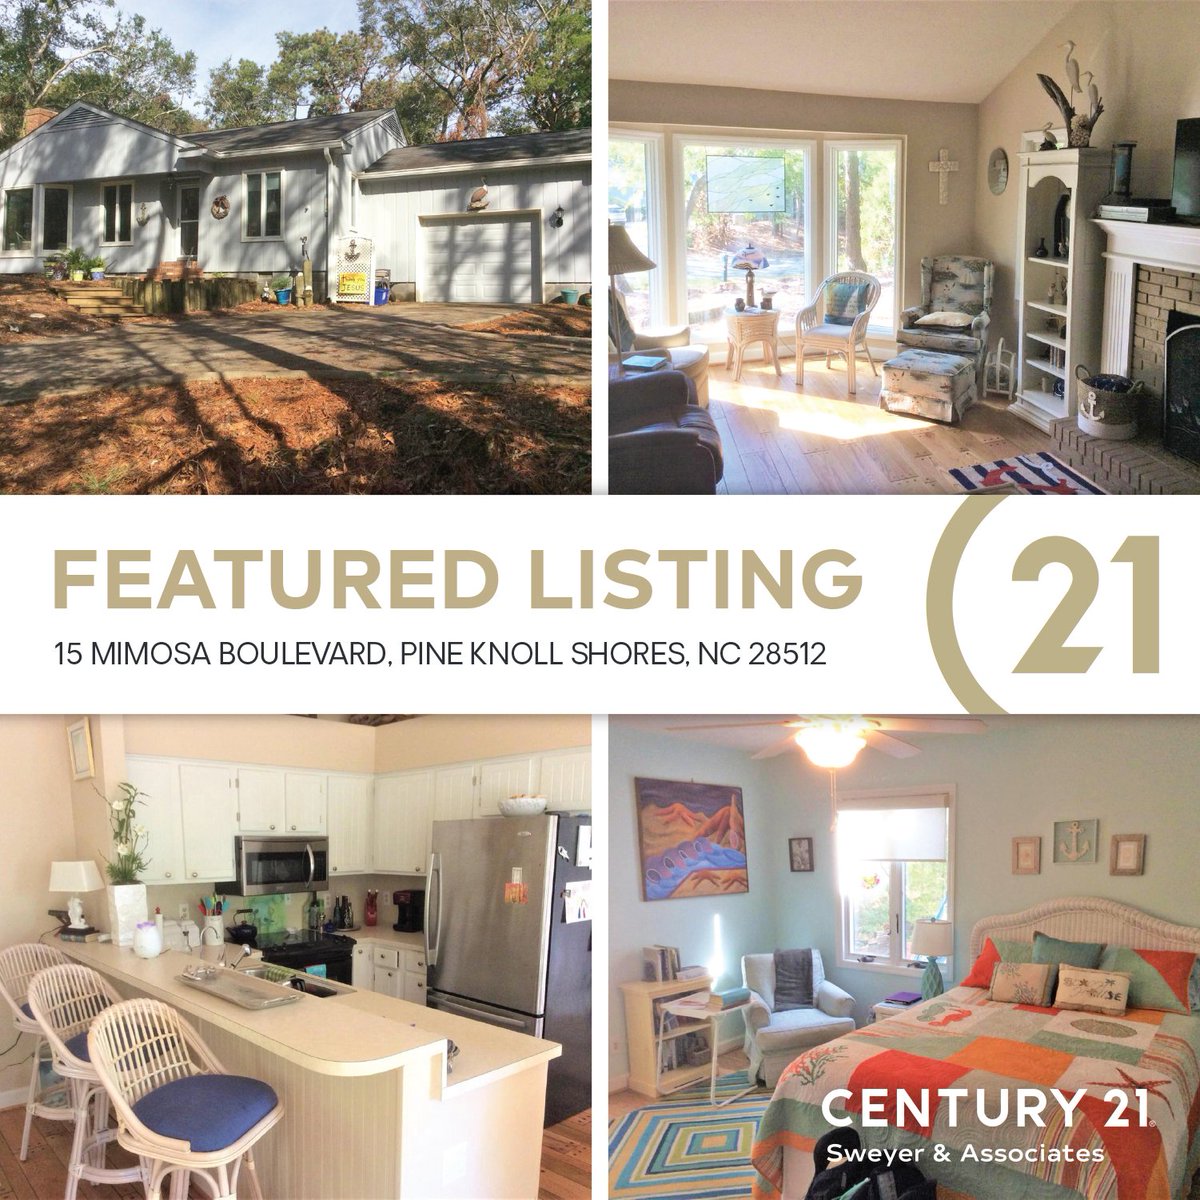 Century 21 Sweyer On Twitter Charming 3 Bed 2 Bath Home